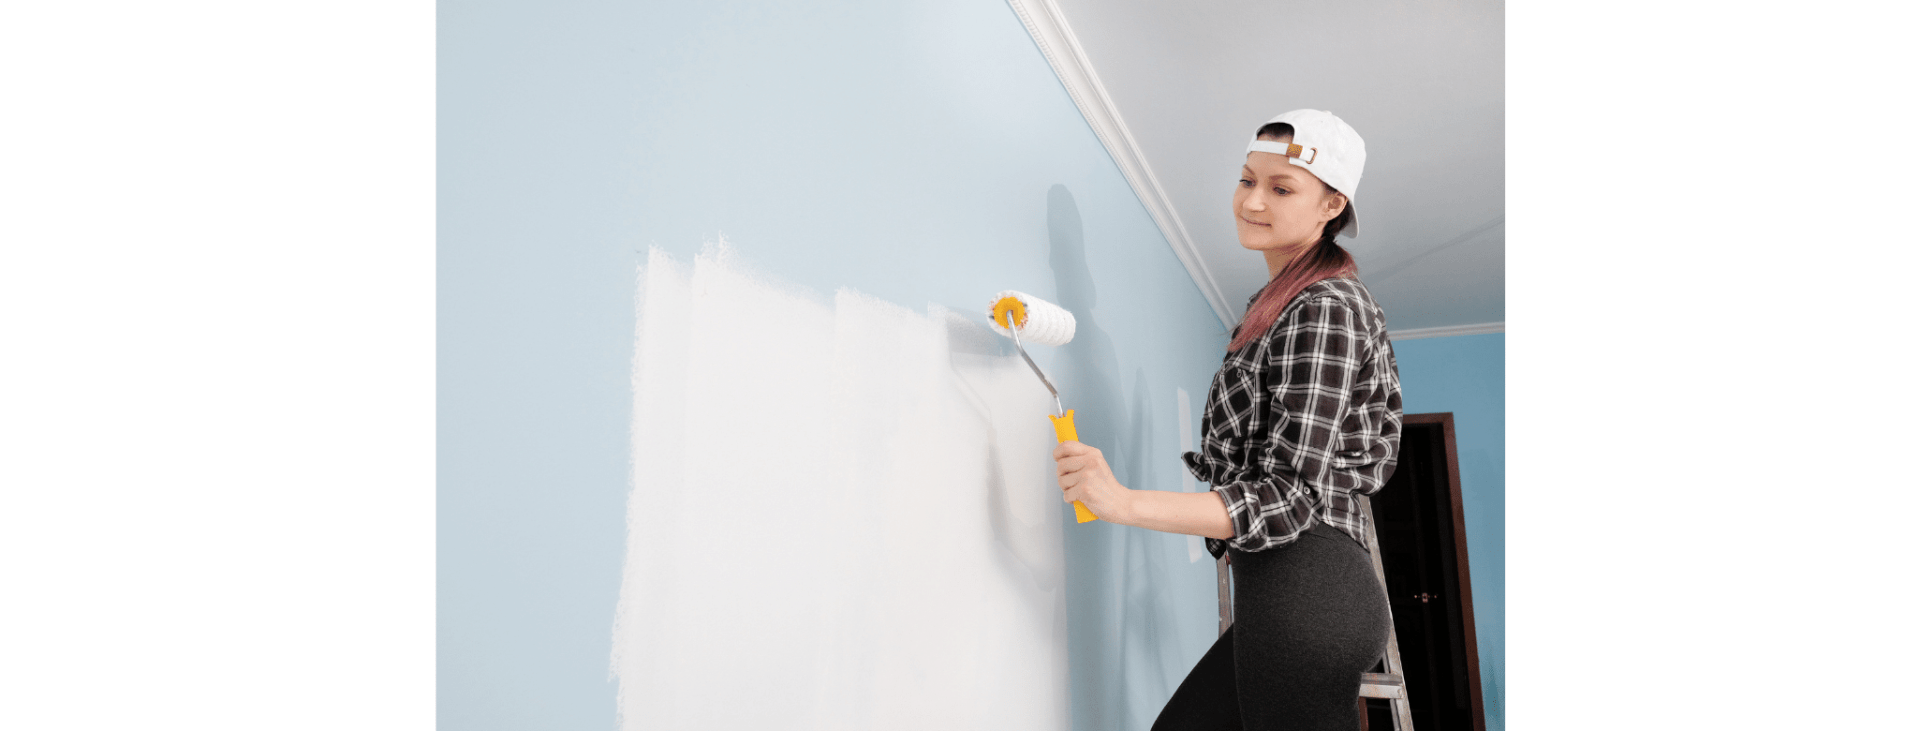 girl painting a wall